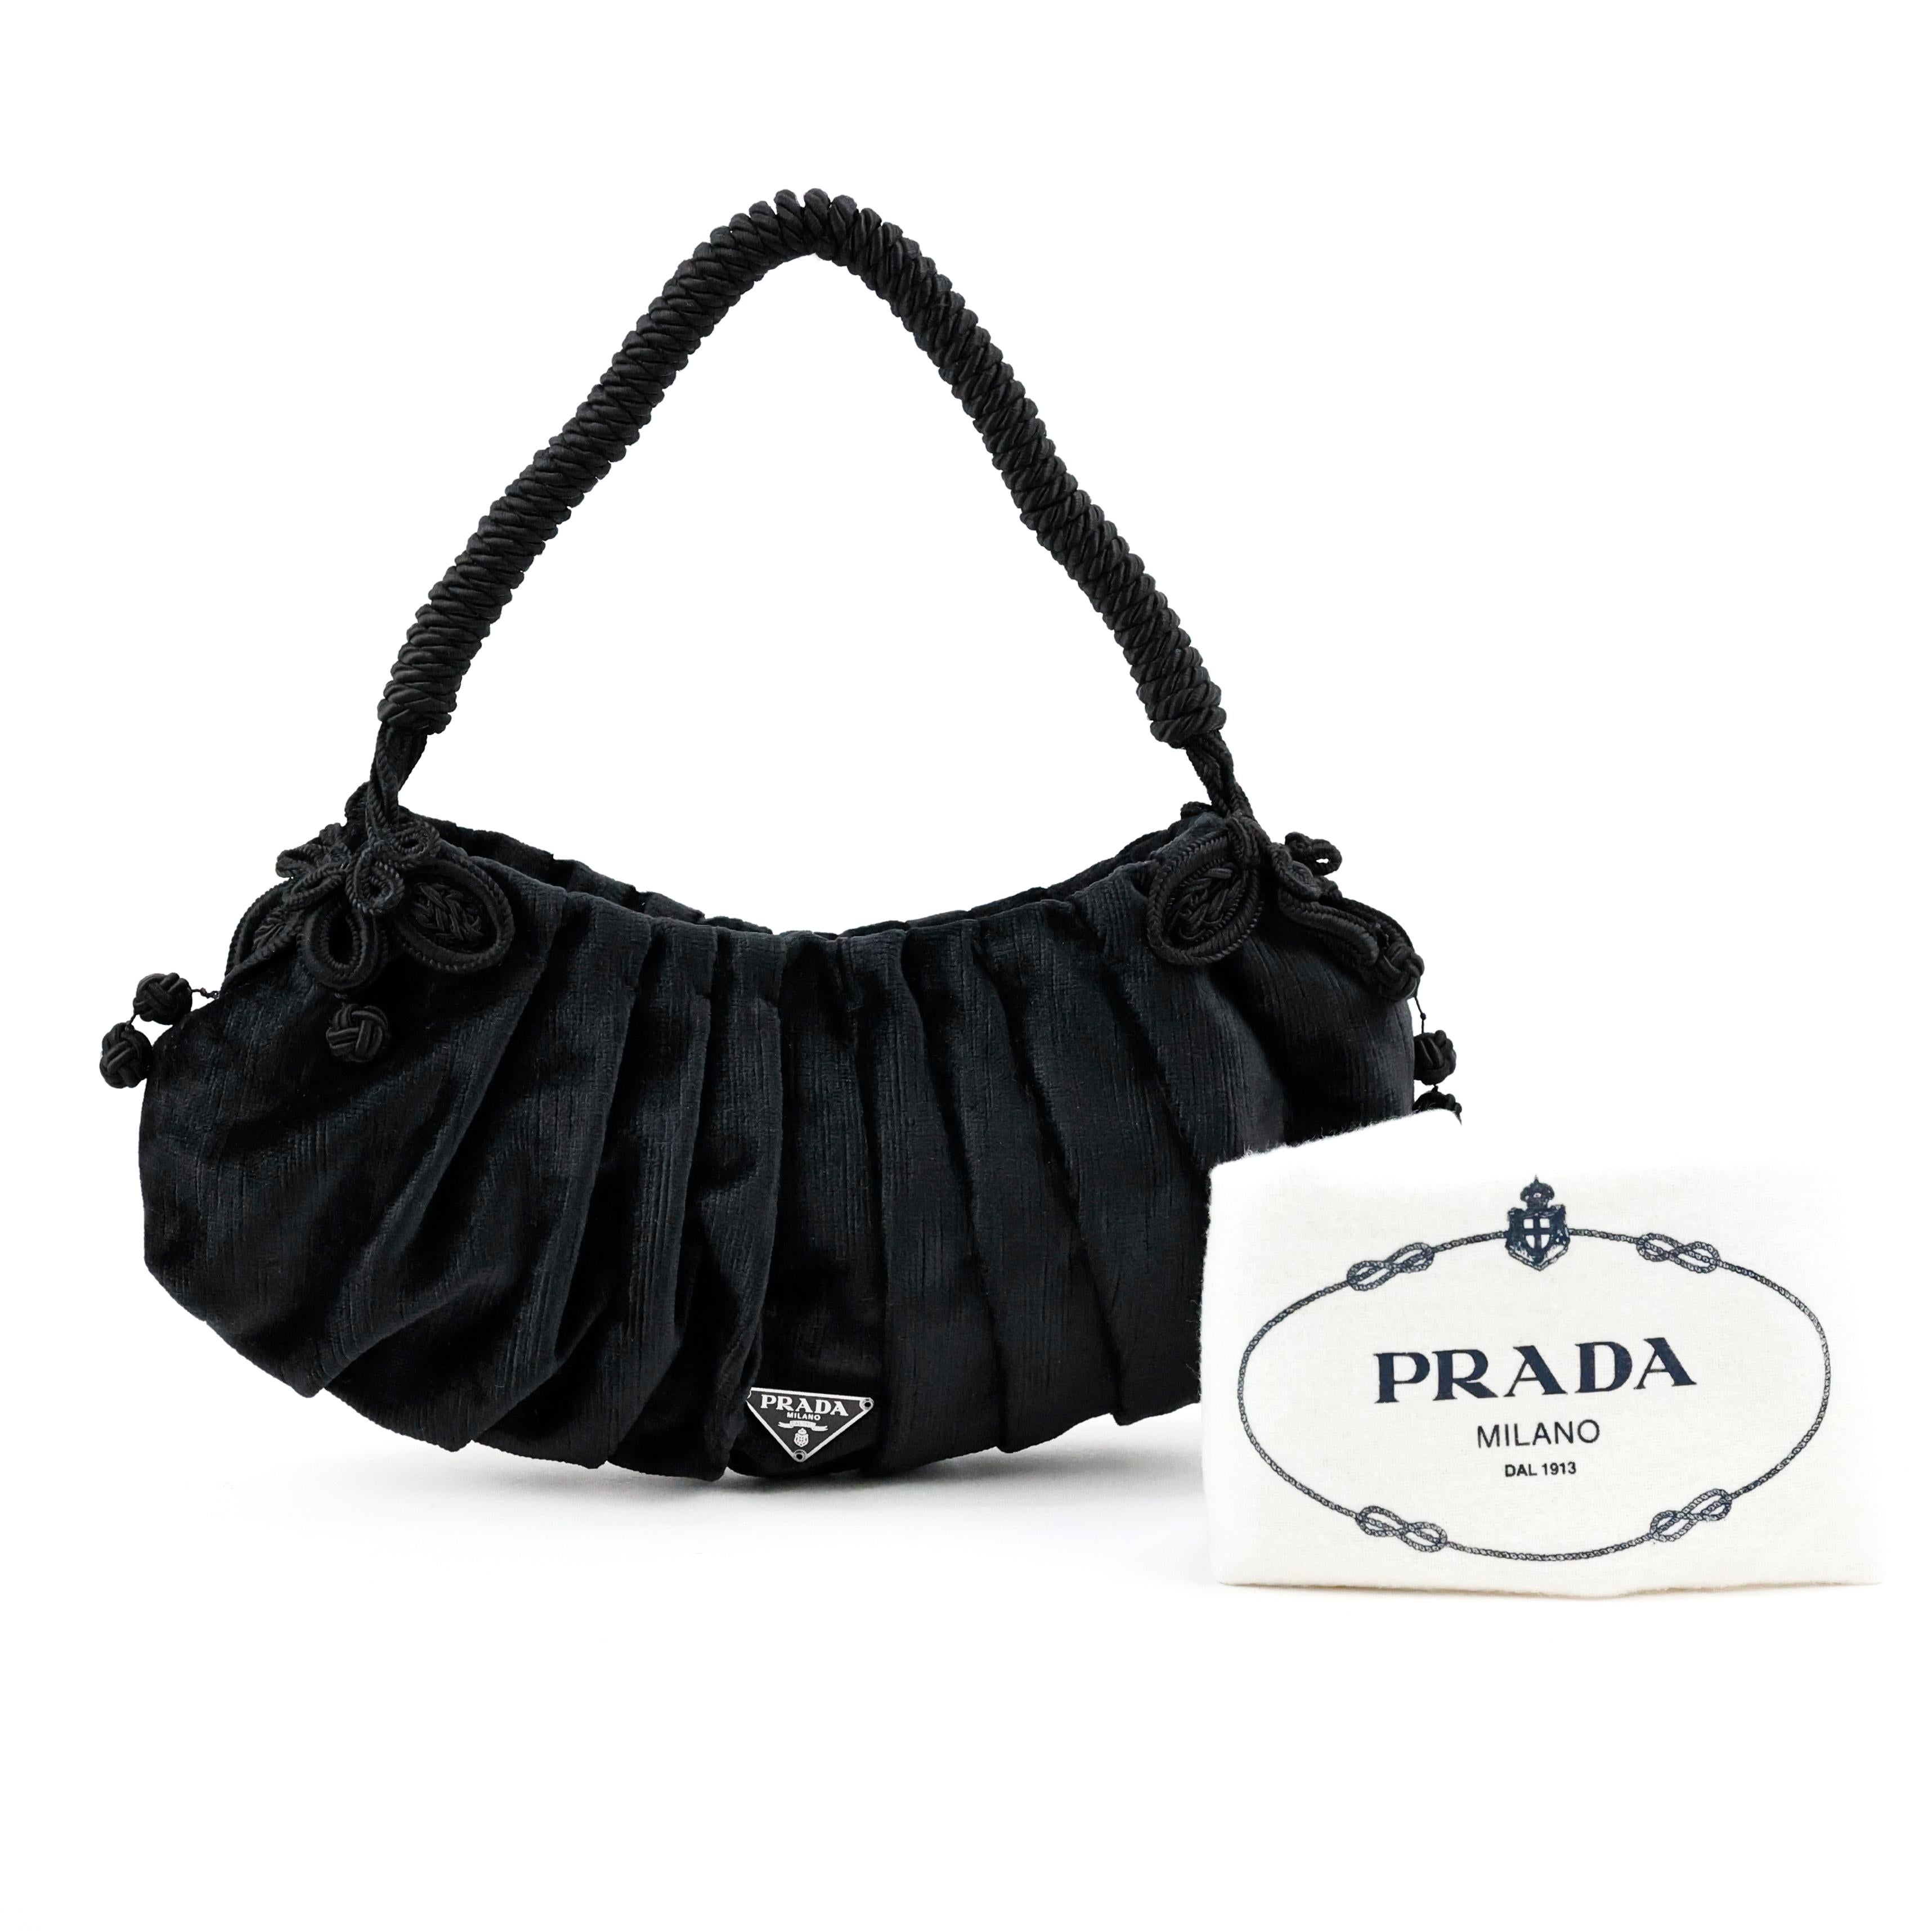 Prada Bag in black embroidered corduroy and silk For Sale 1